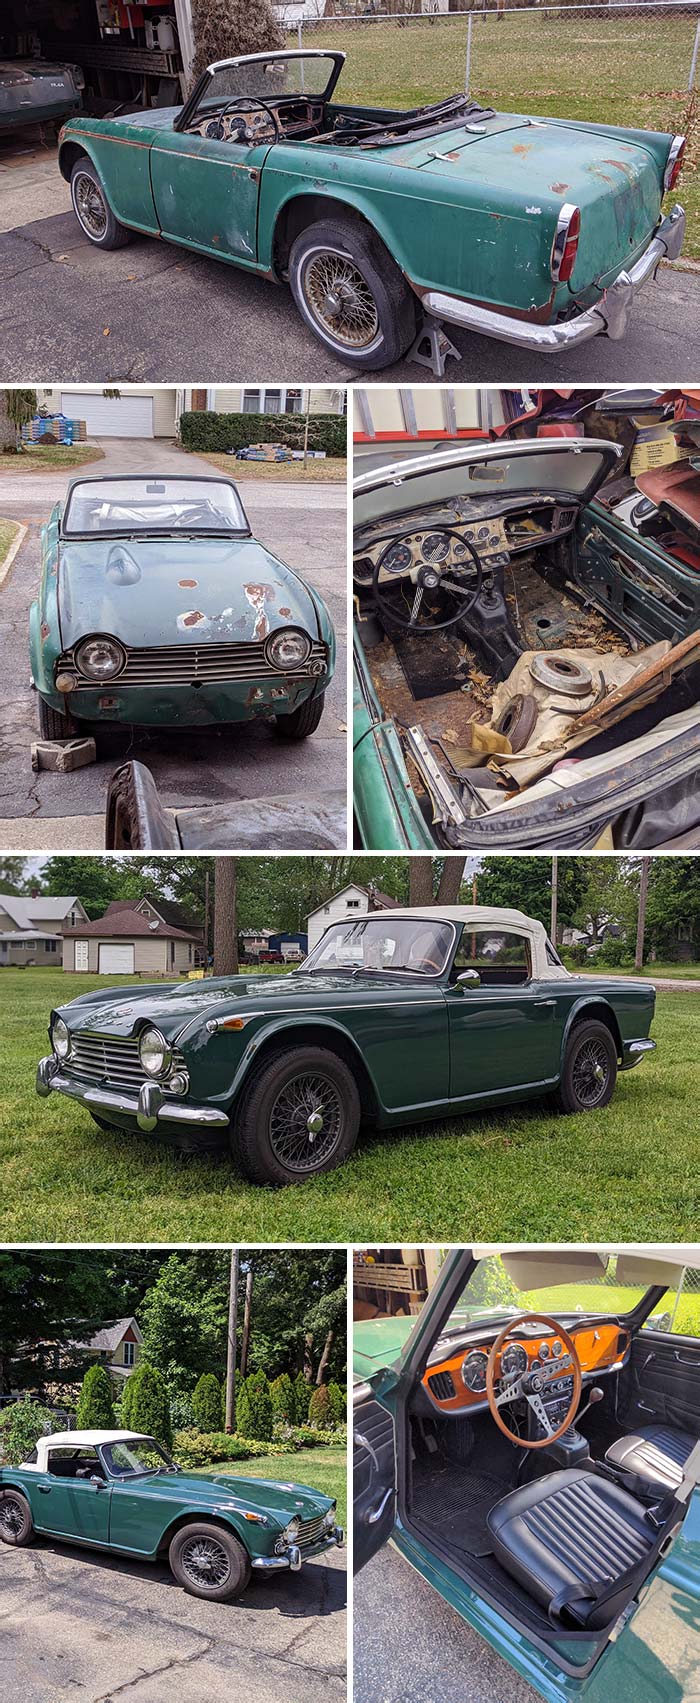 Just Over Two Years Ago I Started My First Major Project, A Non-Running 1967 Triumph TR4A. Here's A Before And After